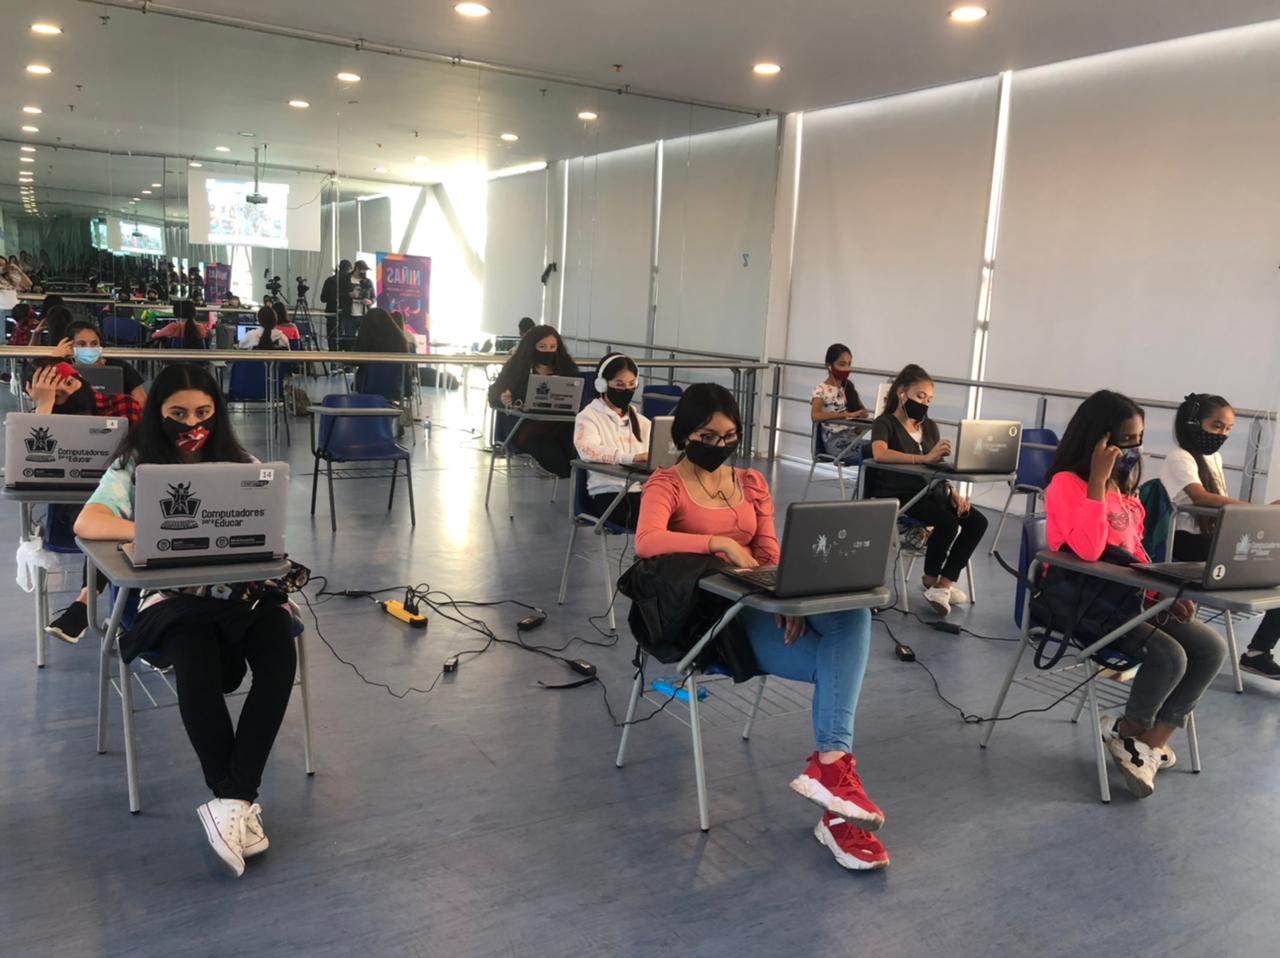 Girls sit behind laptops as part of Vive Bailando's STEM and dance initiative